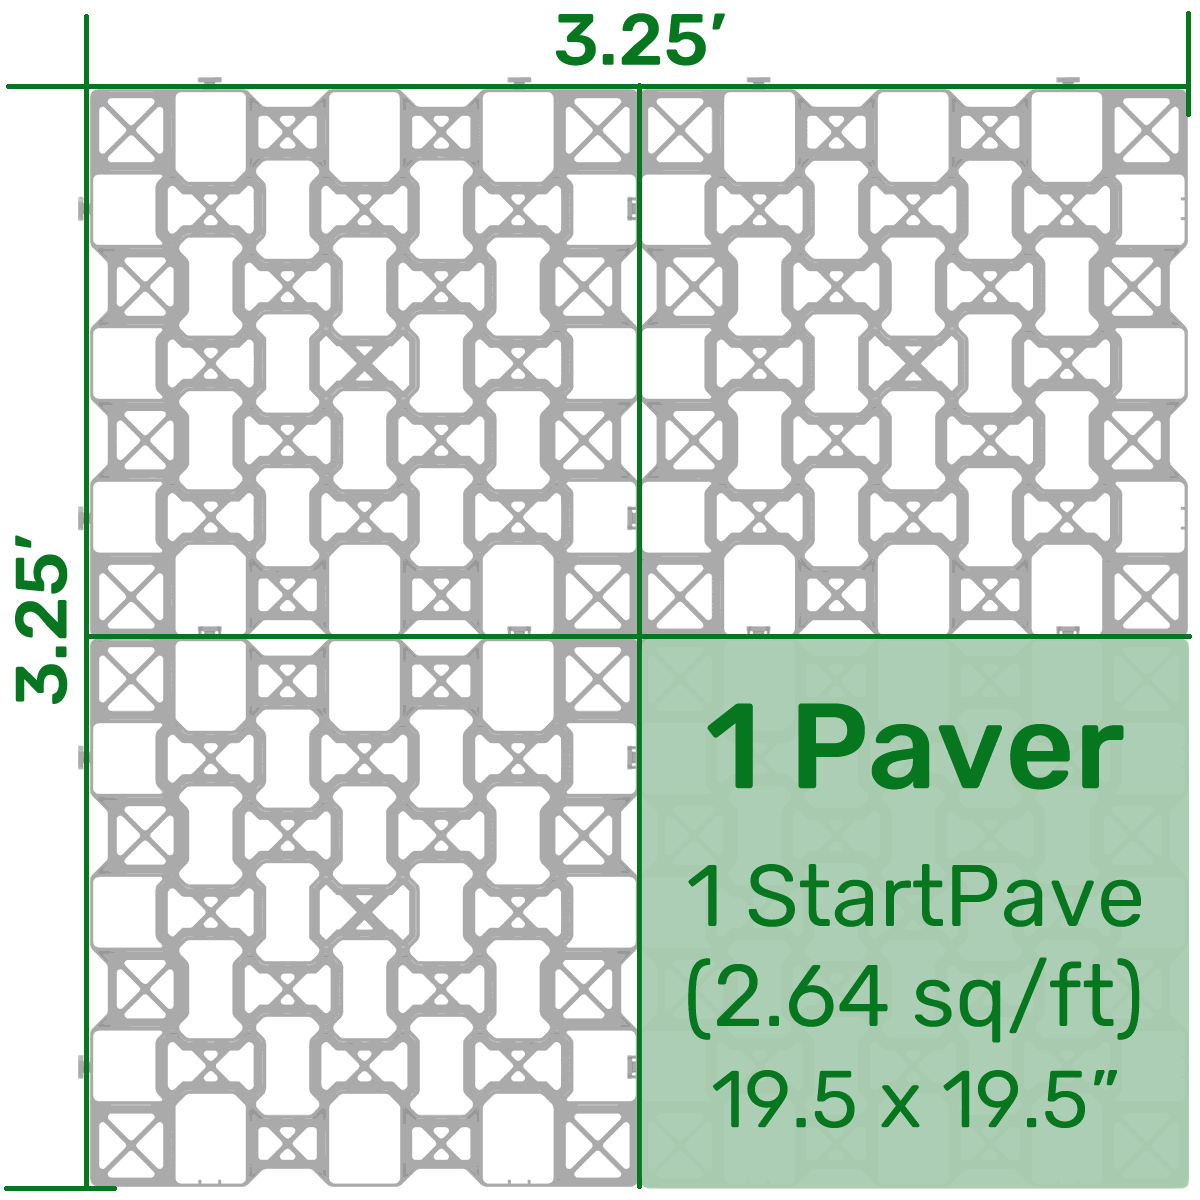 StartPave Size Guide